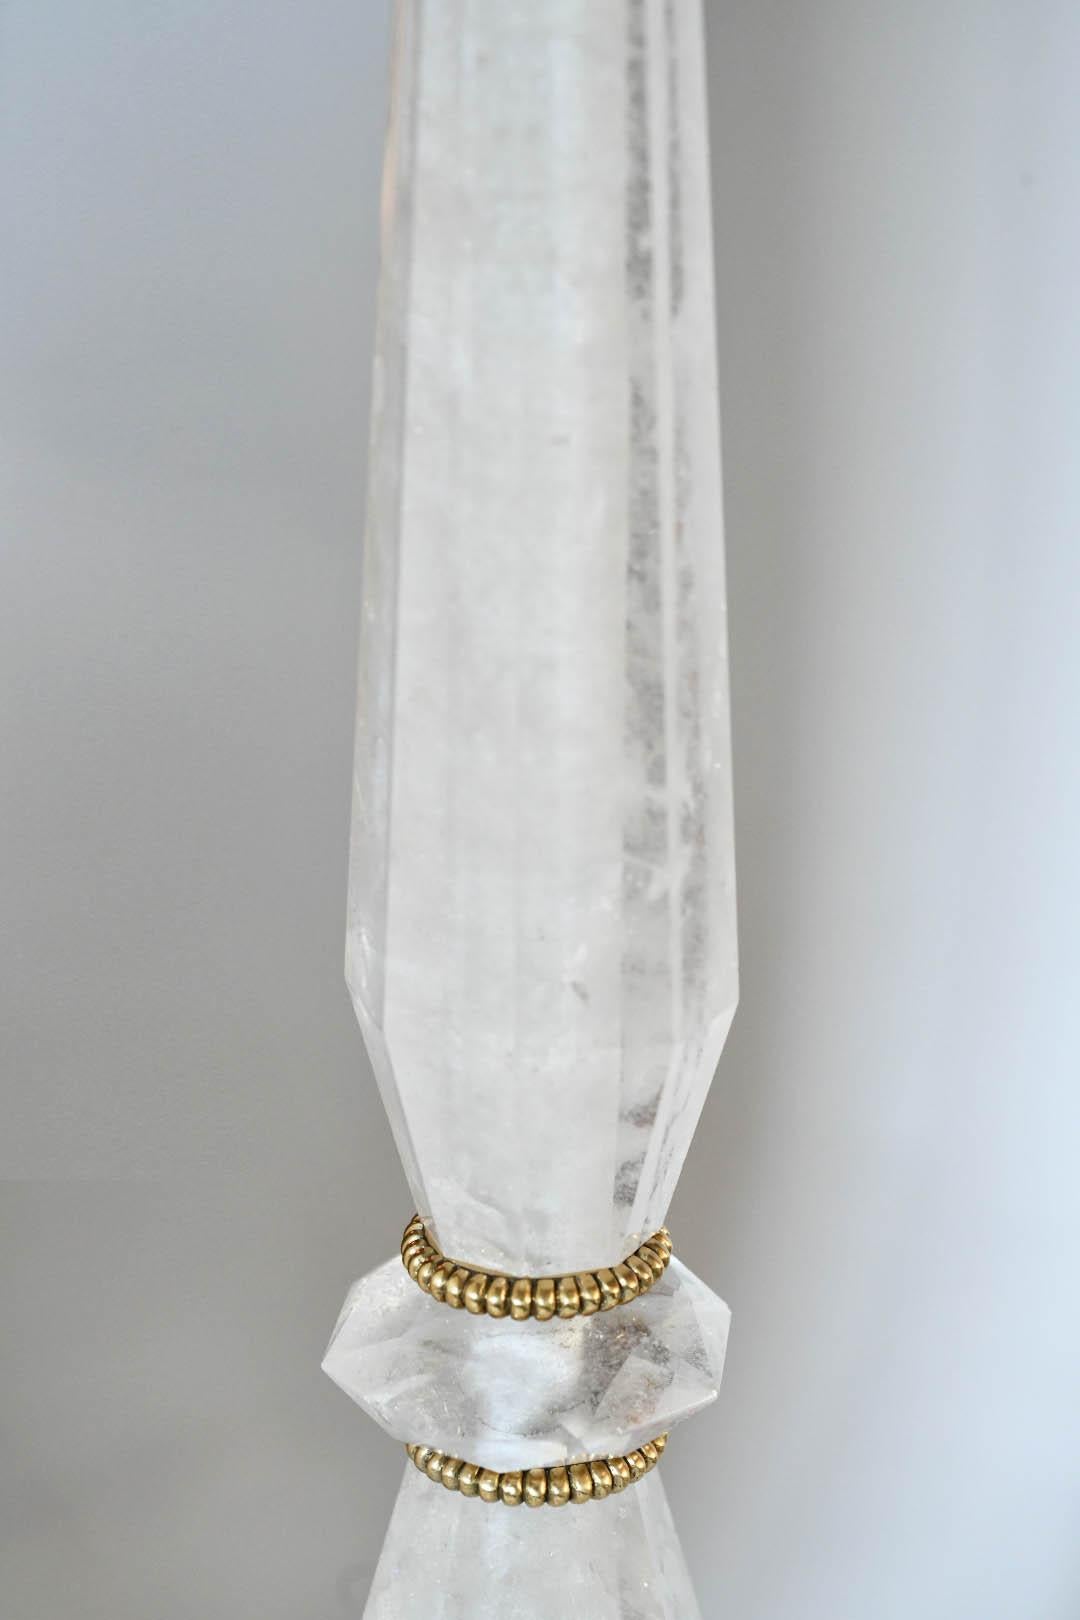 A pair of Classic style rock crystal lamps with fine cast brass bases. Created by Phoenix Gallery, NYC.
Measure: To the top of the rock crystal 18